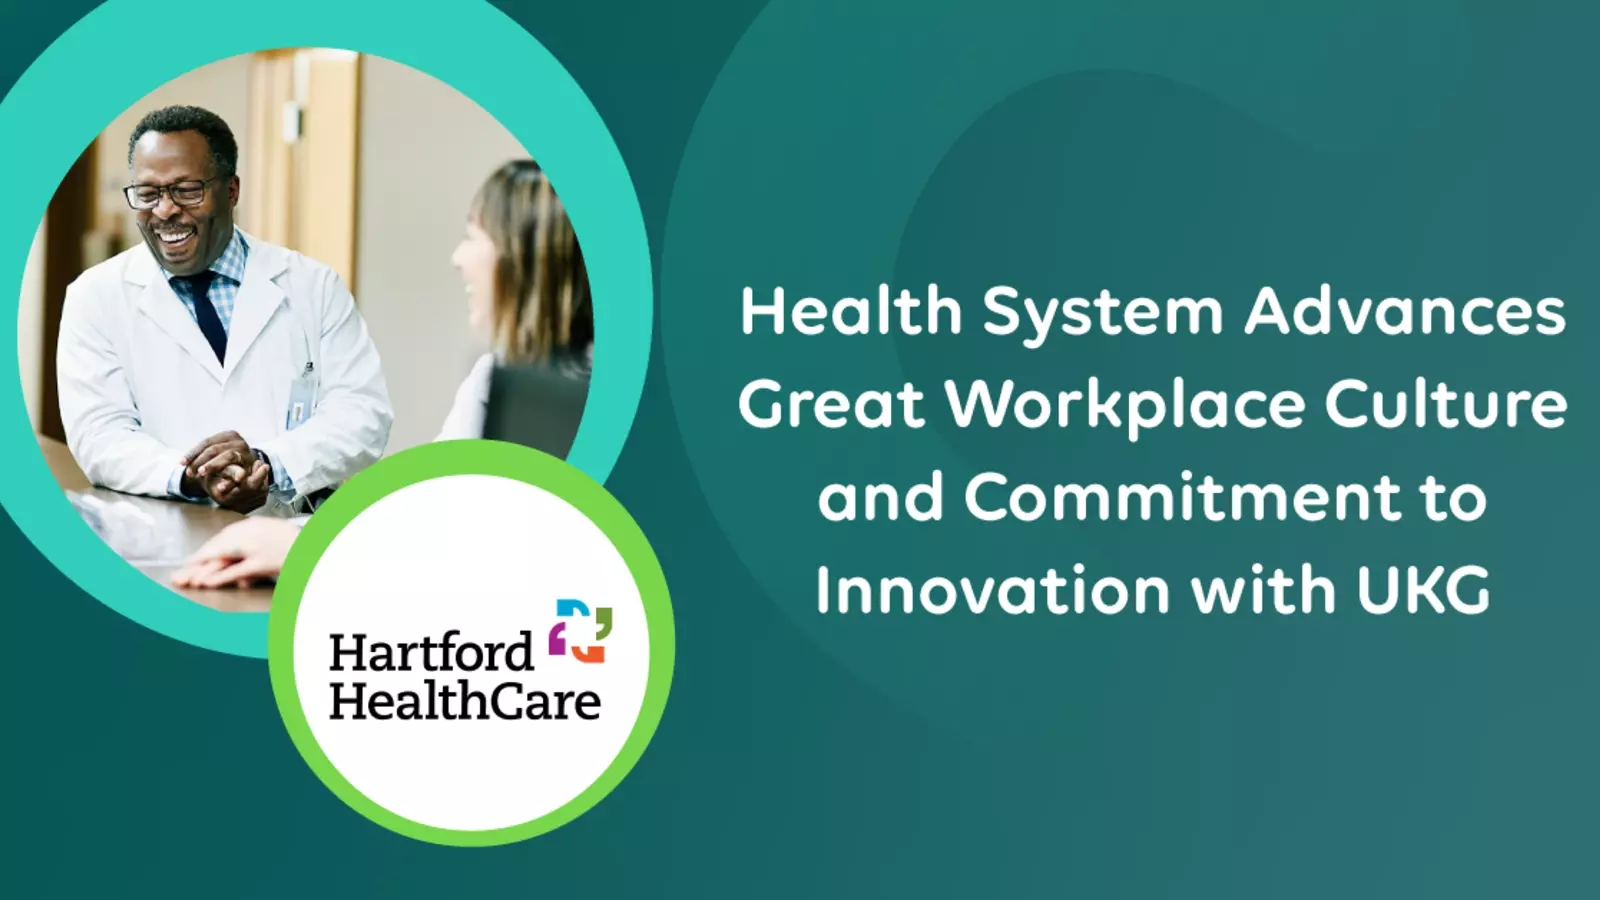 Health System Advances Great Workplace Culture